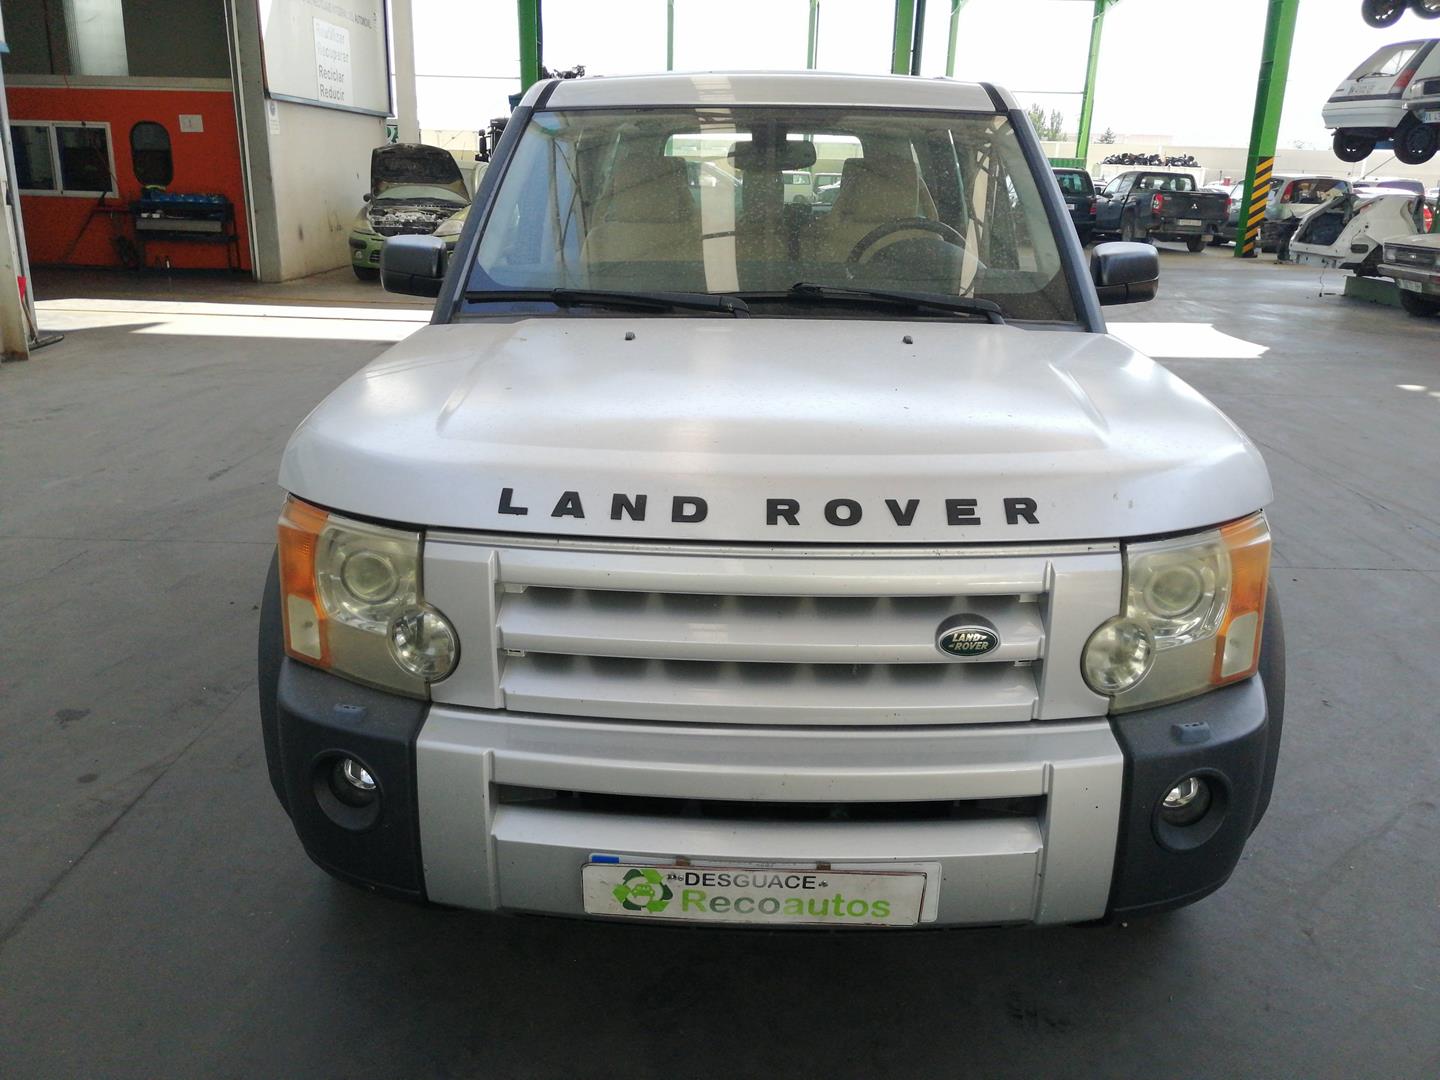 LAND ROVER Discovery 4 generation (2009-2016) Другие трубы QGC500131 21726981